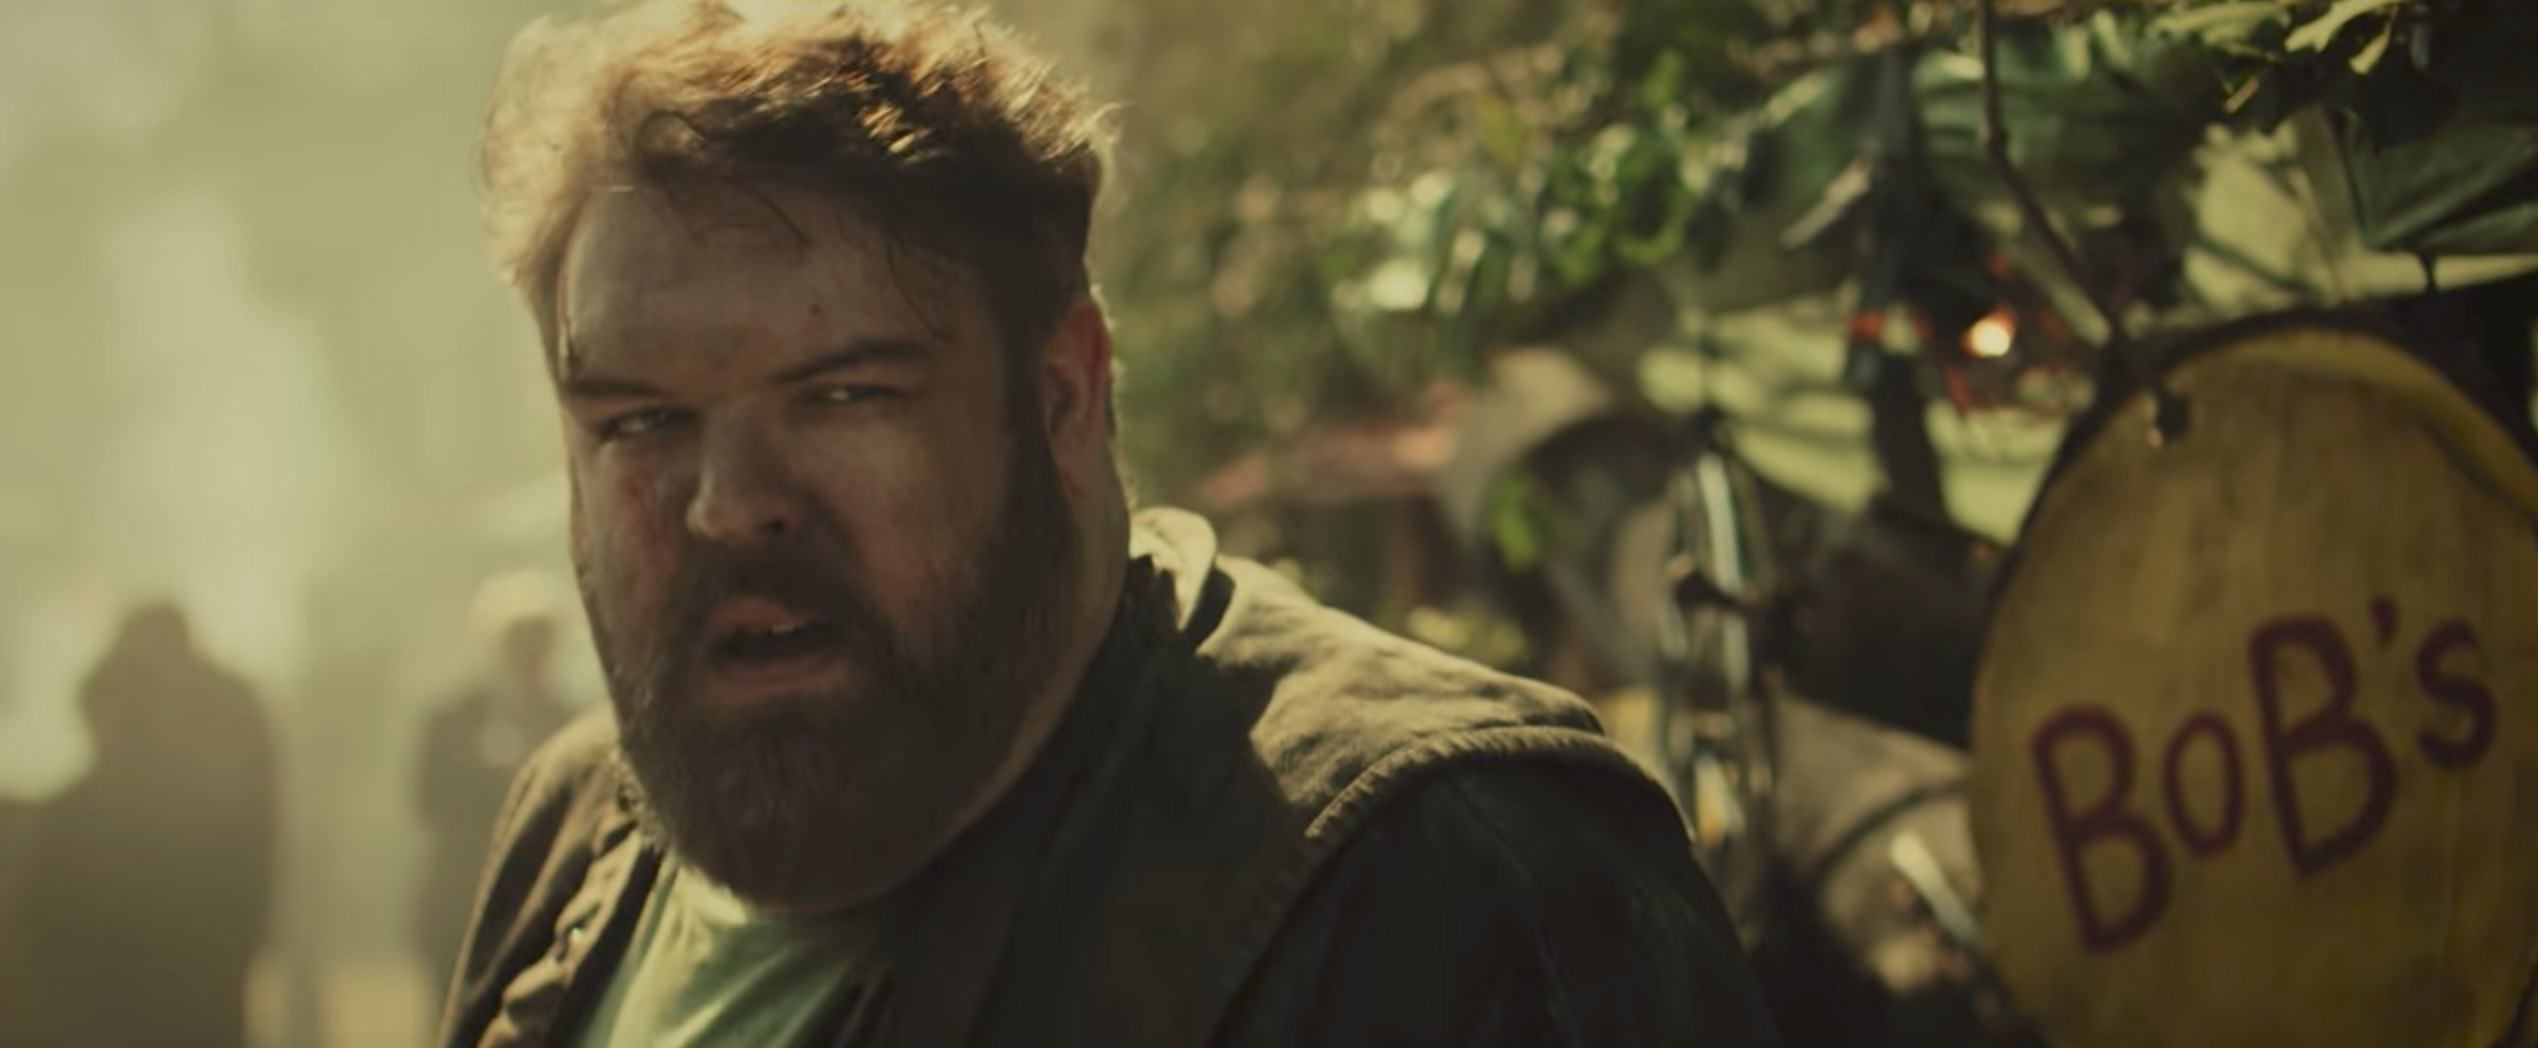 Game of Thrones’ Hodor has more than one word of dialog in short film Biopunk